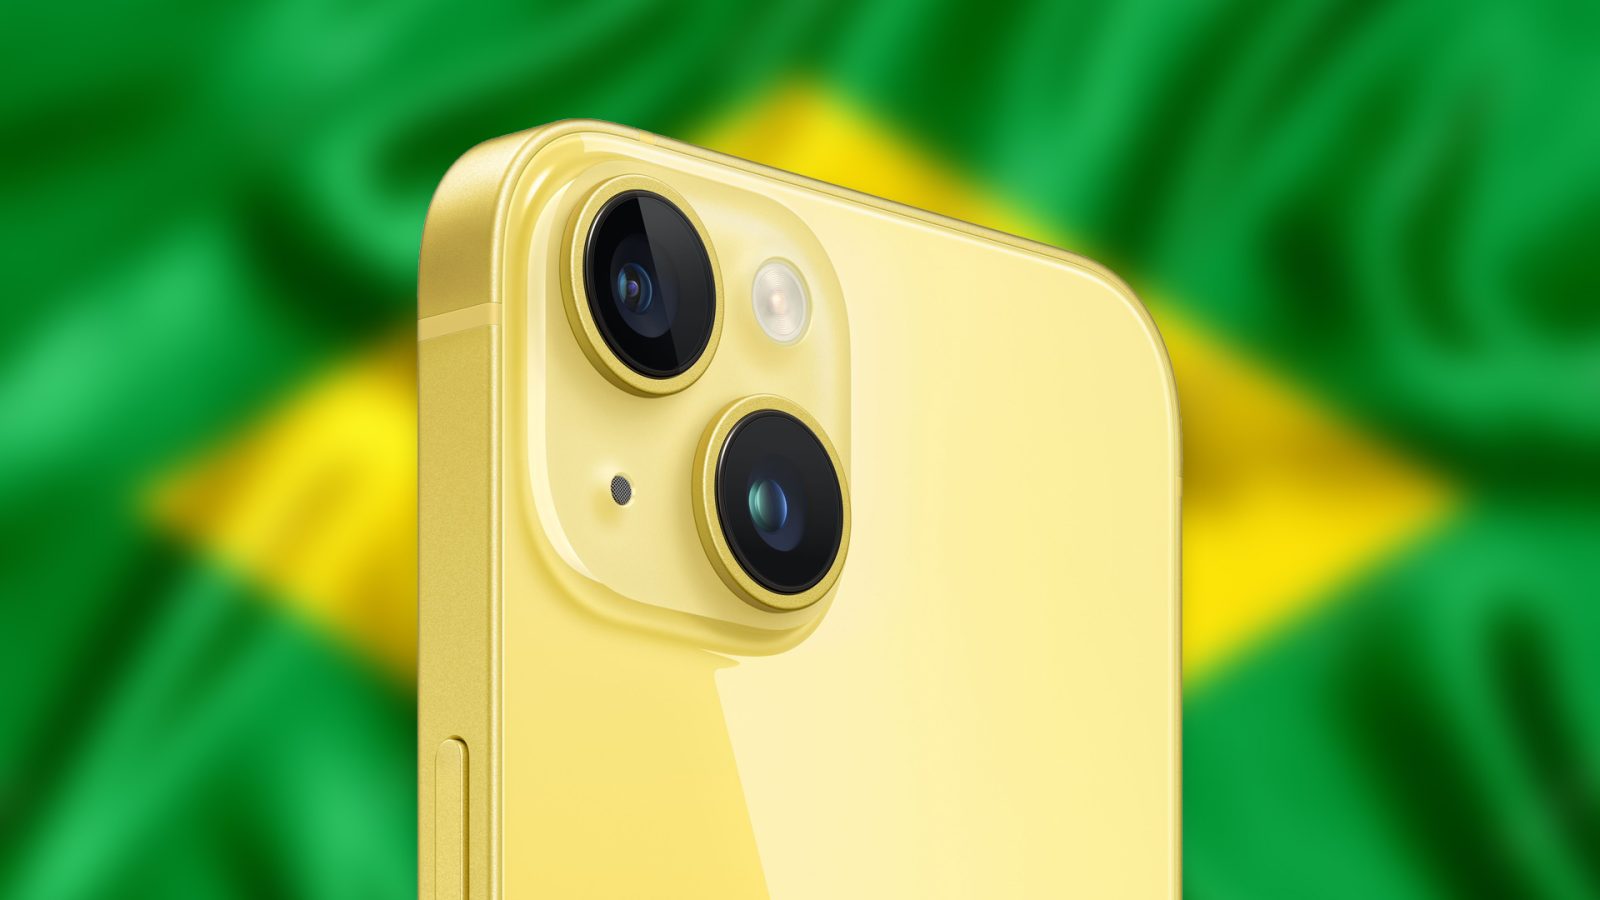 Apple starts assembling iPhone 14 in Brazil as it keeps shifting production from China